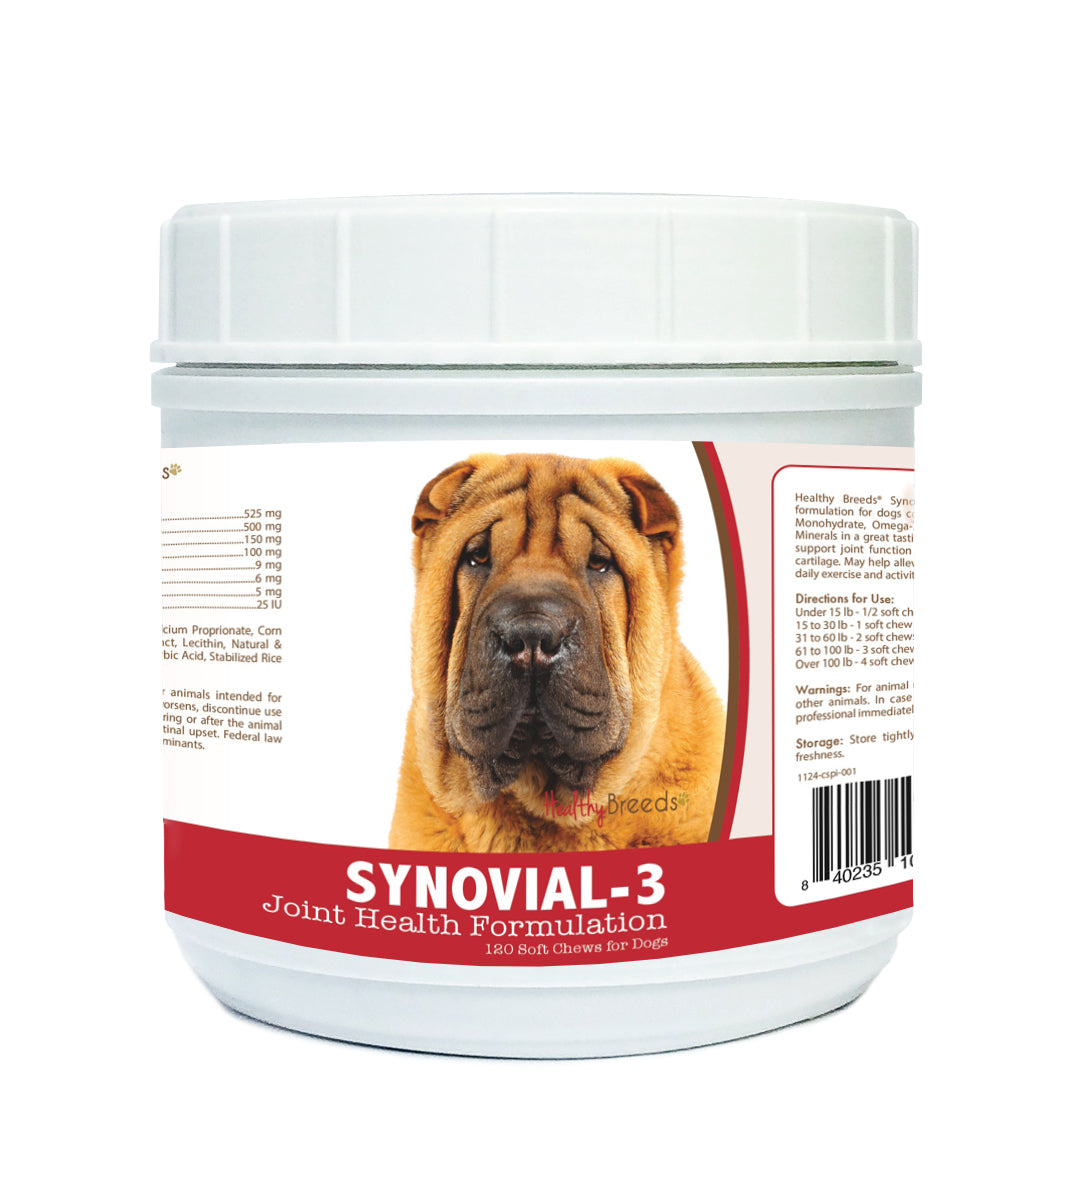 Chinese Shar Pei Synovial-3 Joint Health Formulation Soft Chews 120 Count